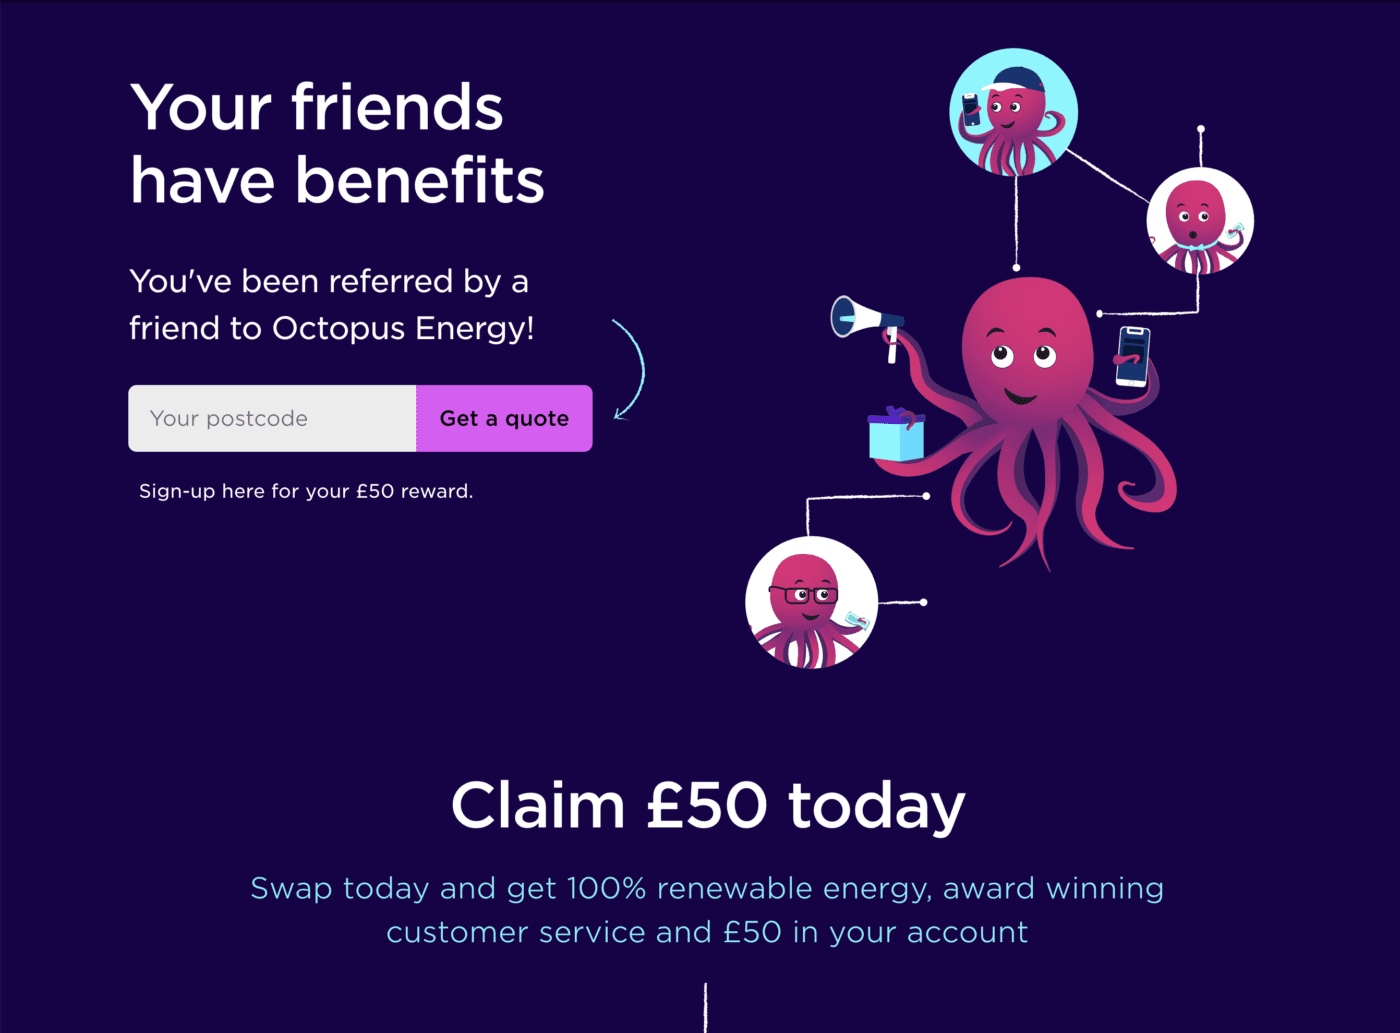 Get £50 off your energy bill by referring a friend to Octopus Energy